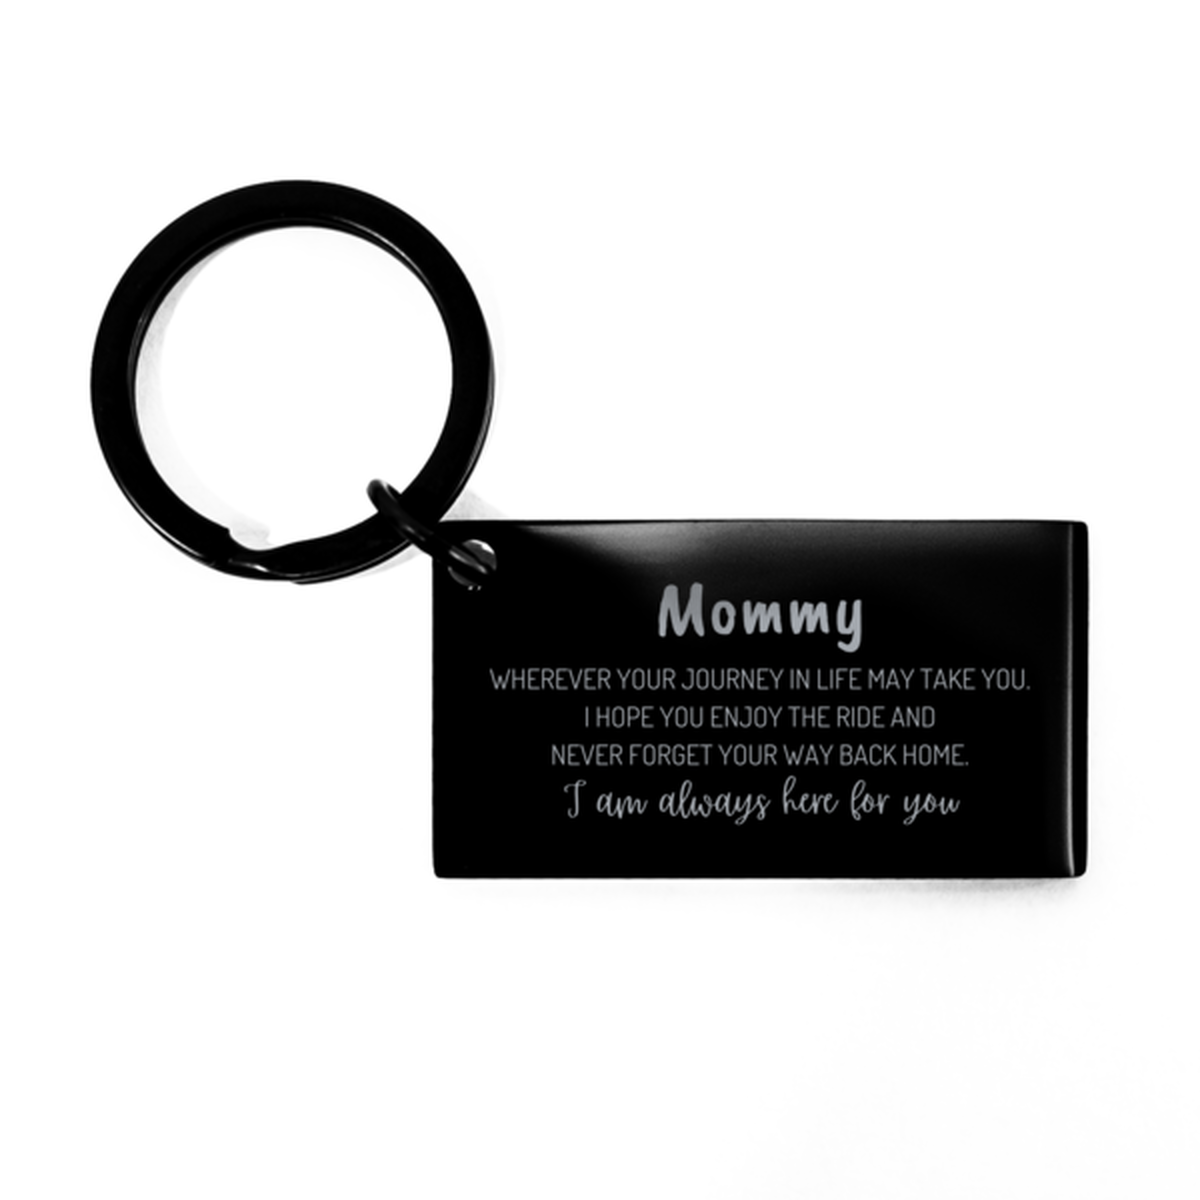 Mommy wherever your journey in life may take you, I am always here for you Mommy Keychain, Awesome Christmas Gifts For Mommy, Mommy Birthday Gifts for Men Women Family Loved One